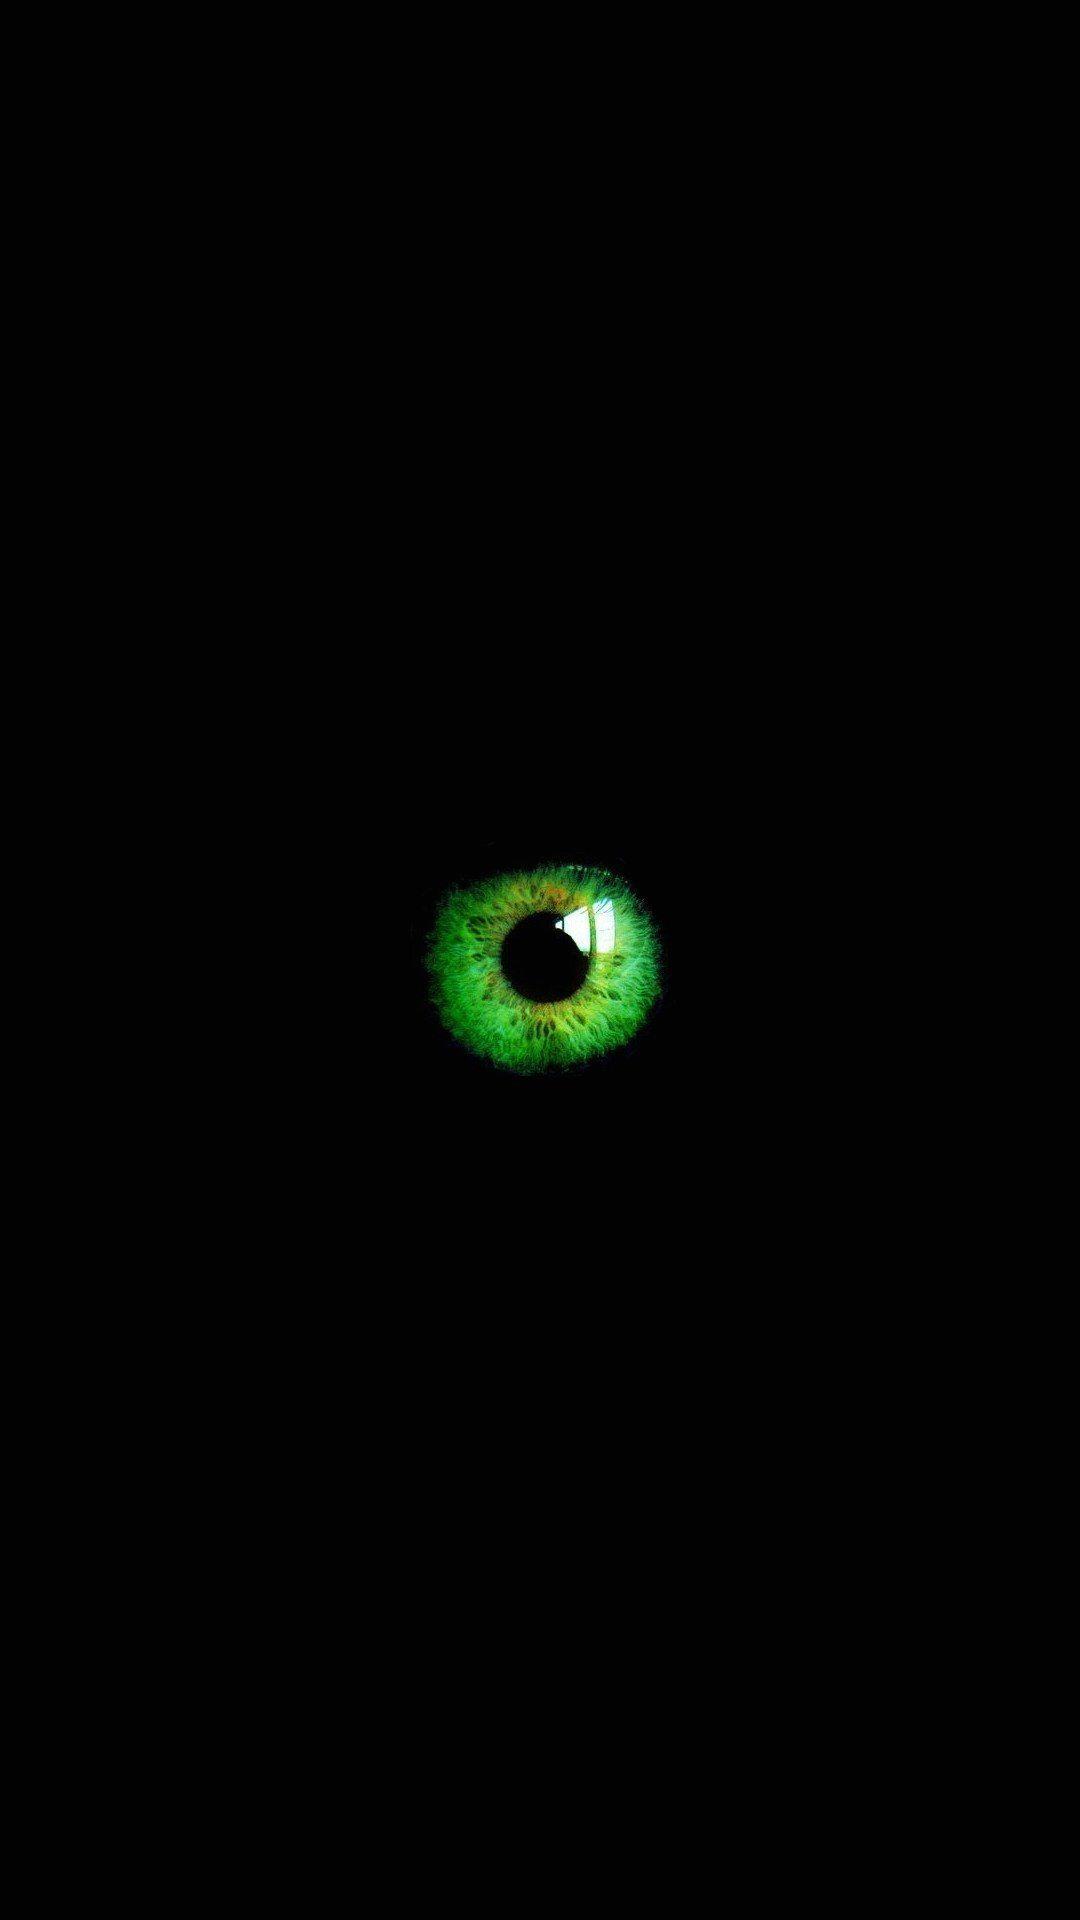 Green eye htc one wallpaper, free and easy to download